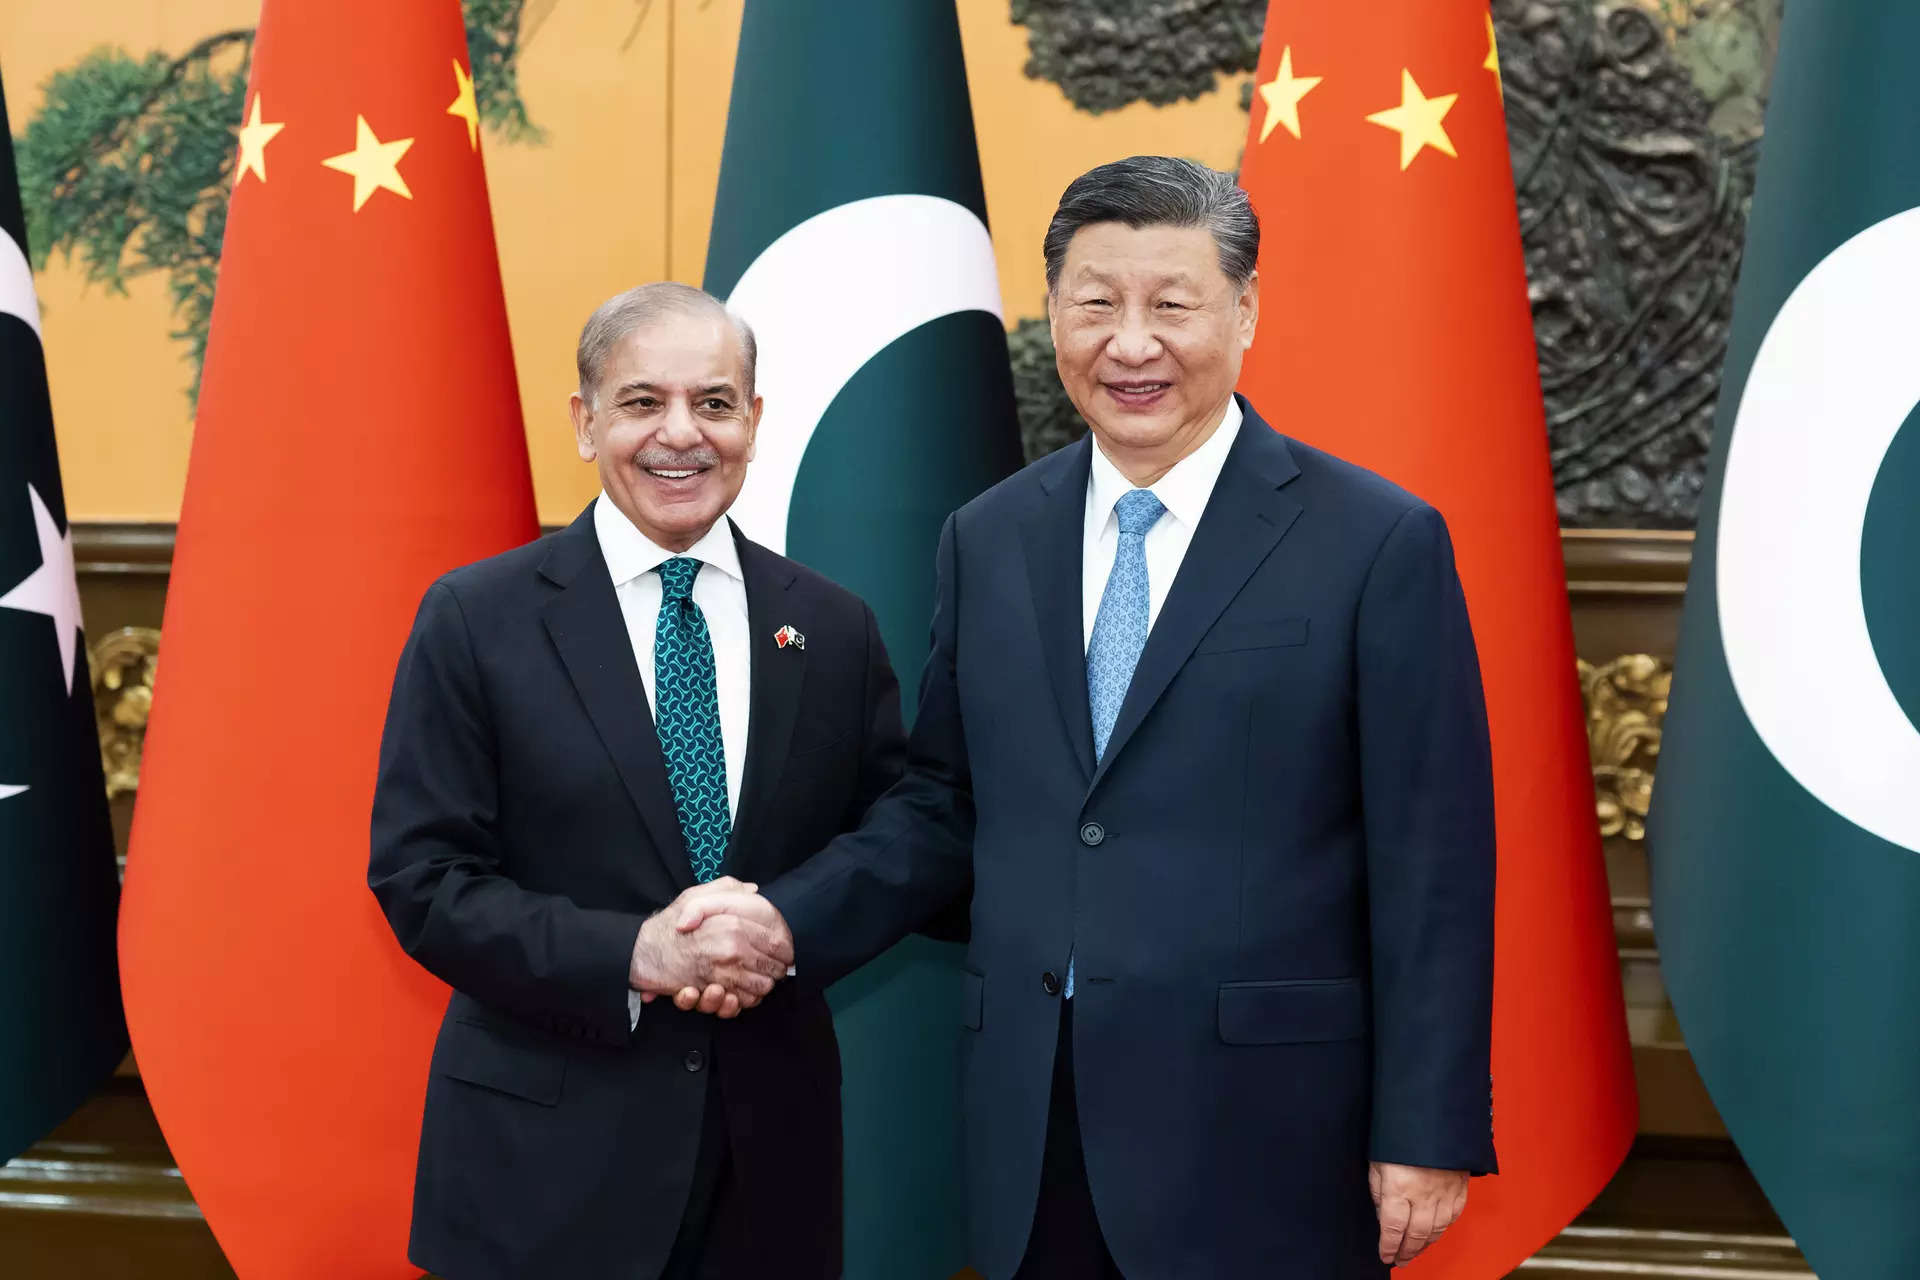 Pakistan Prime Minister Shehbaz Sharif, Chinese President Xi agree to upgrade CPEC